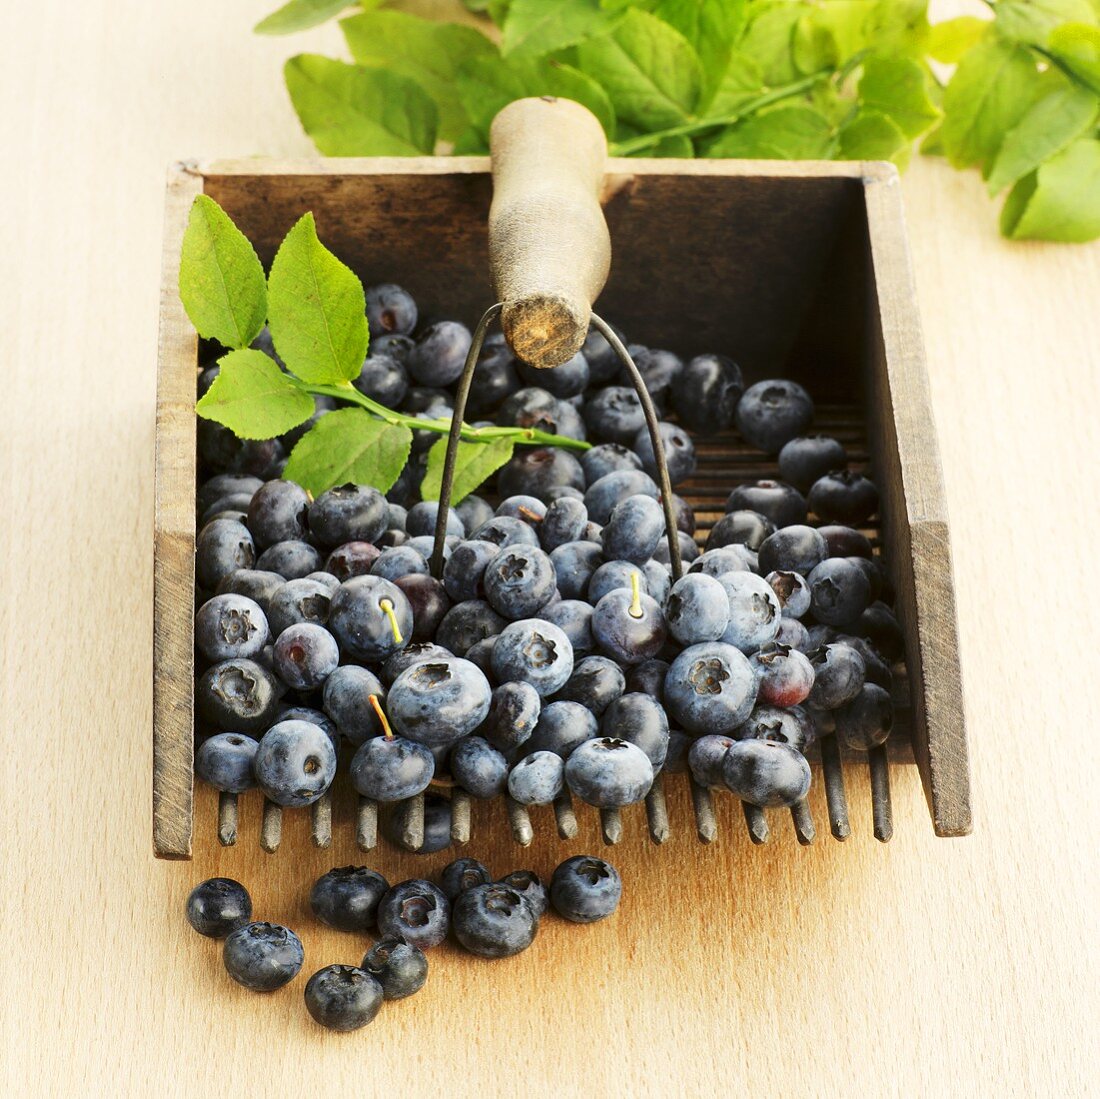 Blueberries with a gardening fork